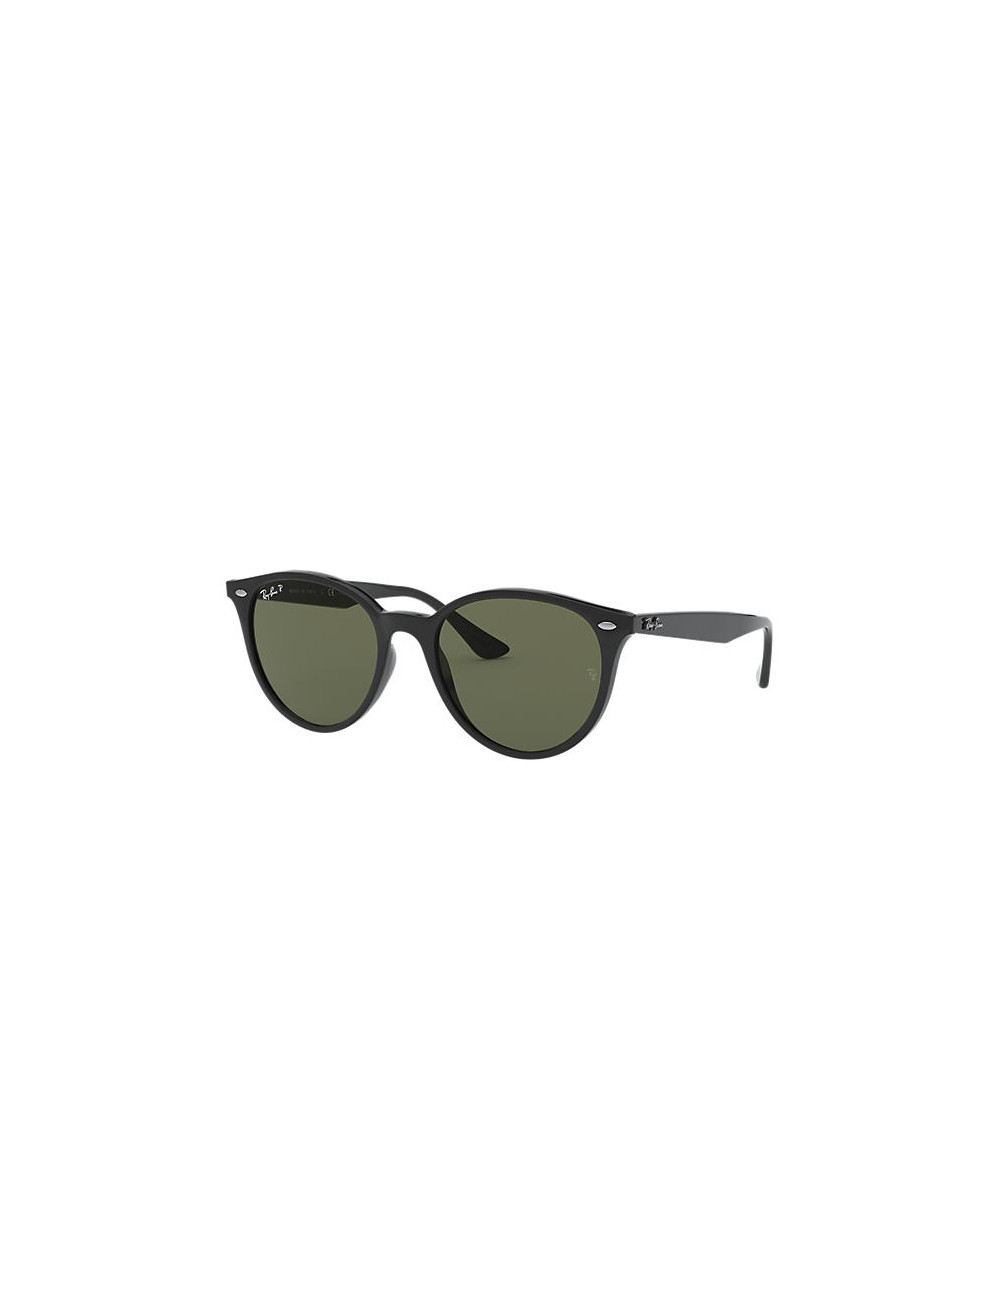 Ray Ban RB4305 601/9A round polarized sunglasses 